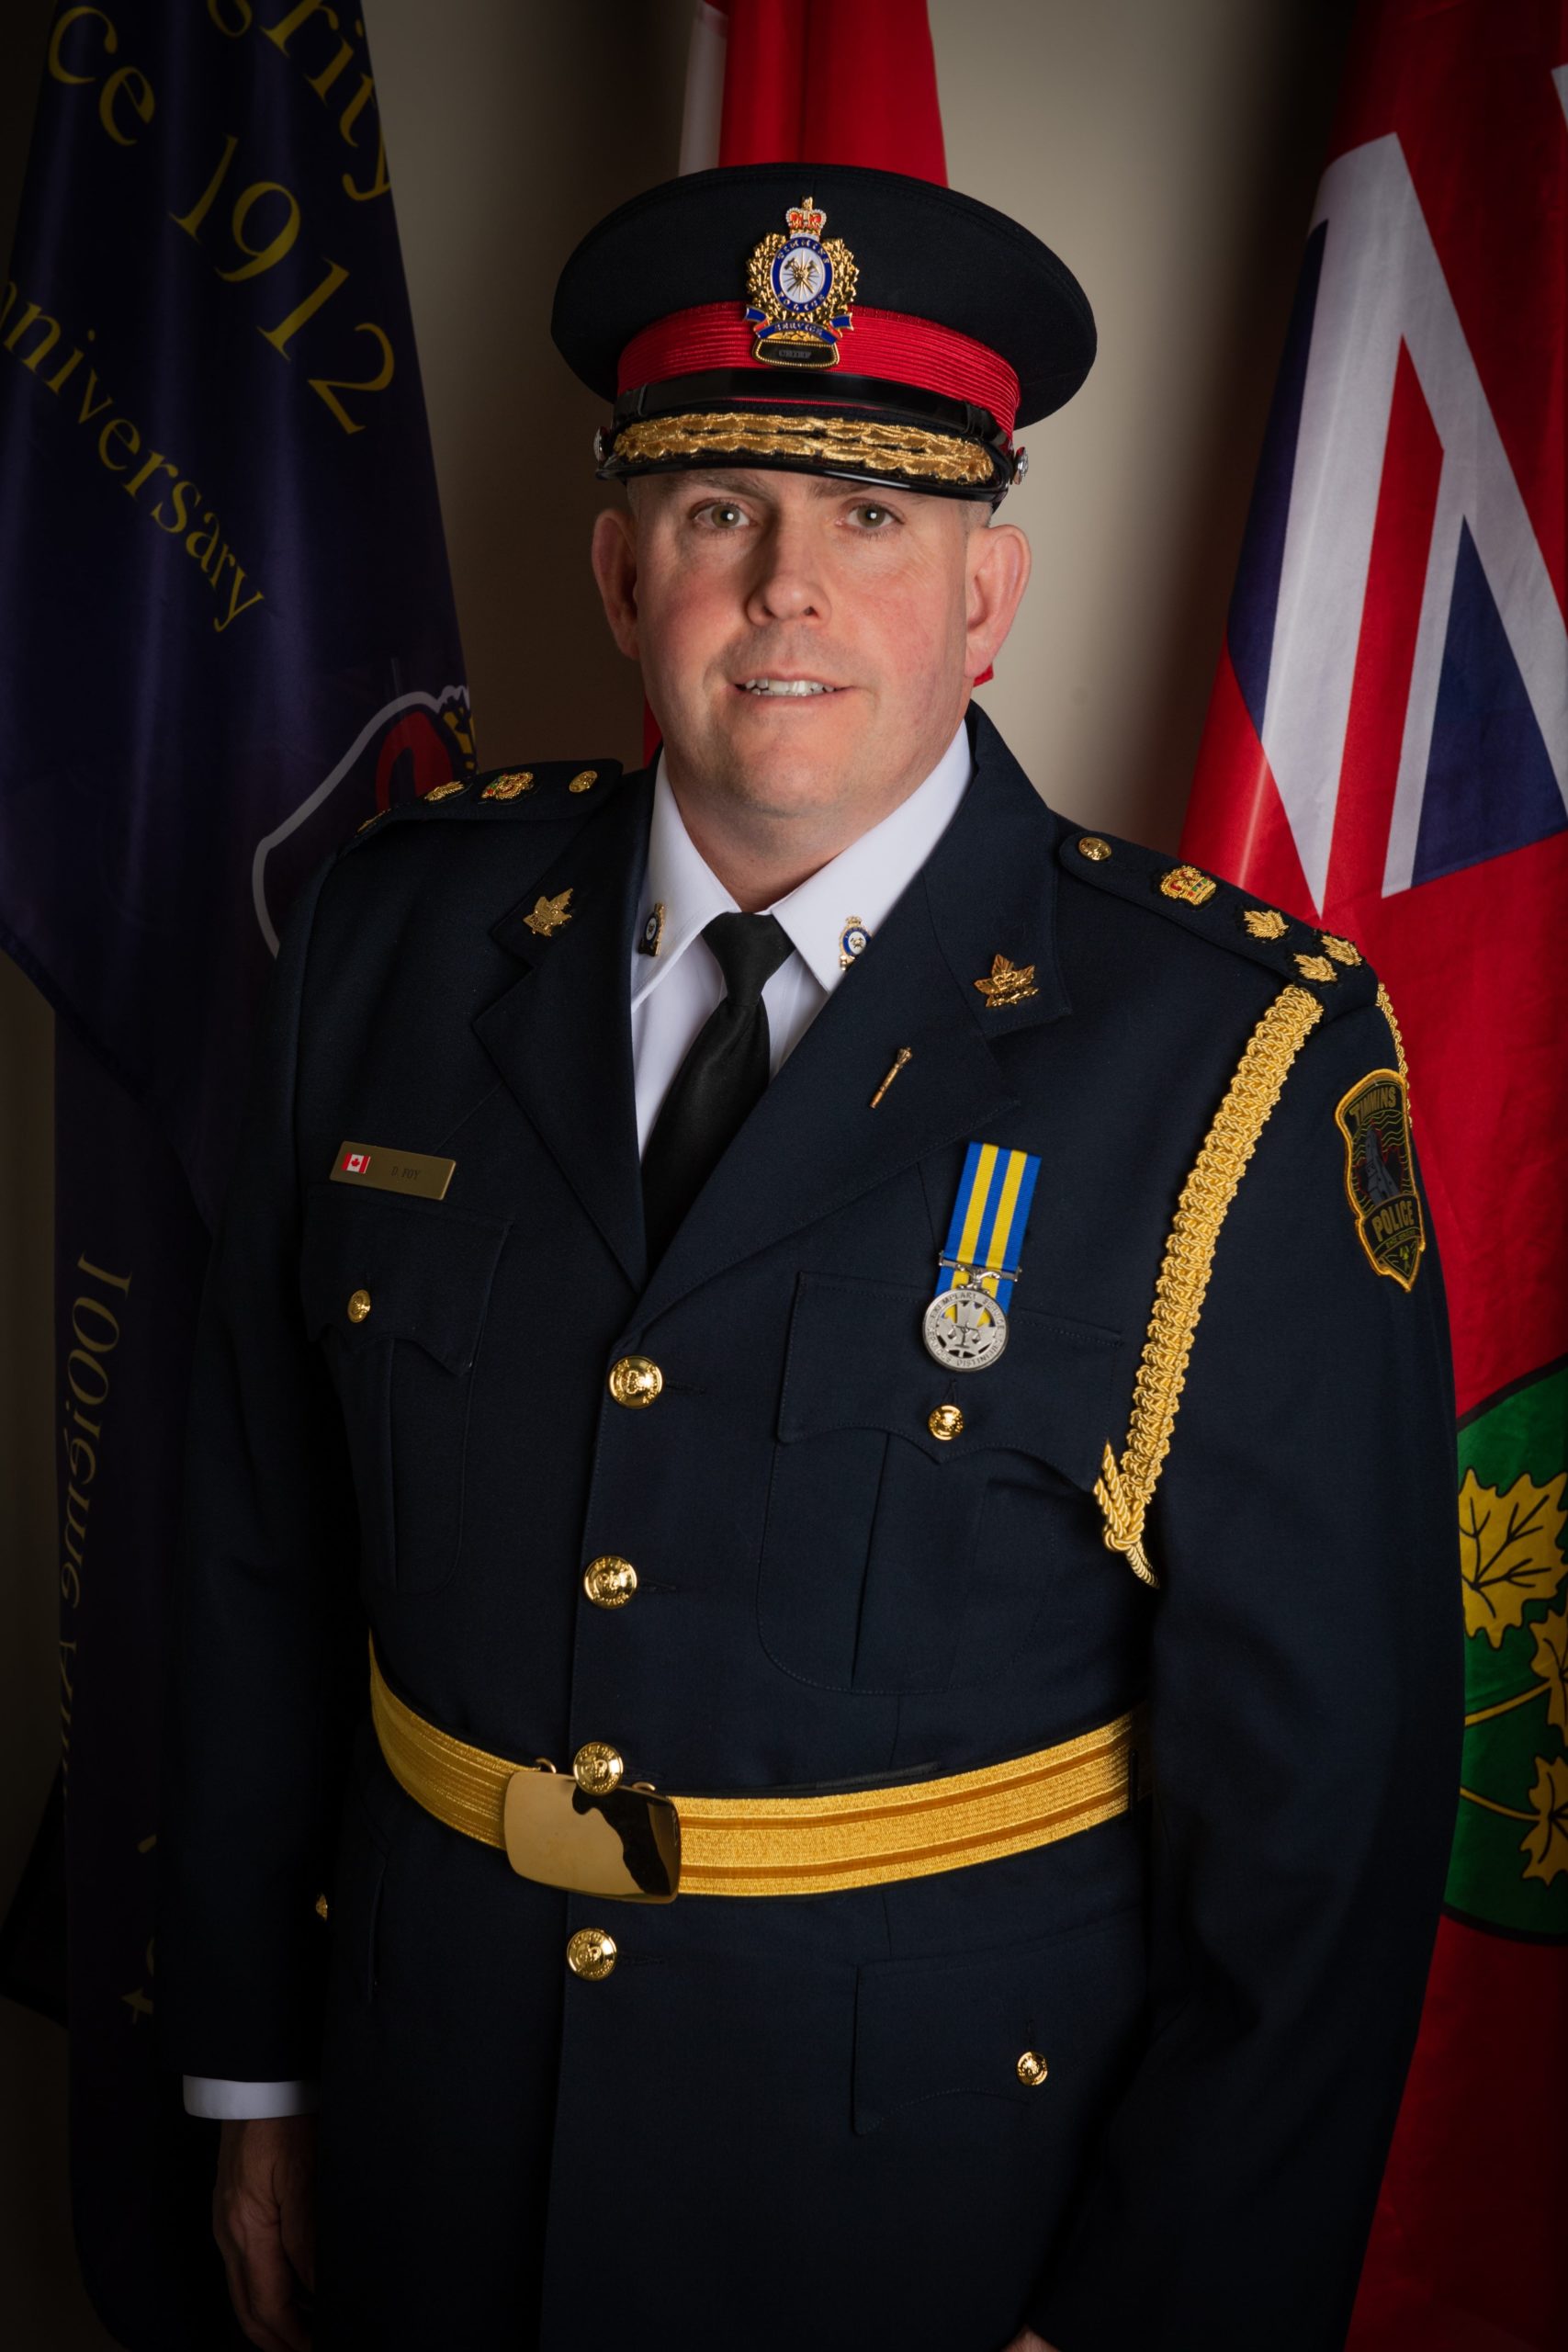 A Timmins Police officer in uniform standing in front of flags.